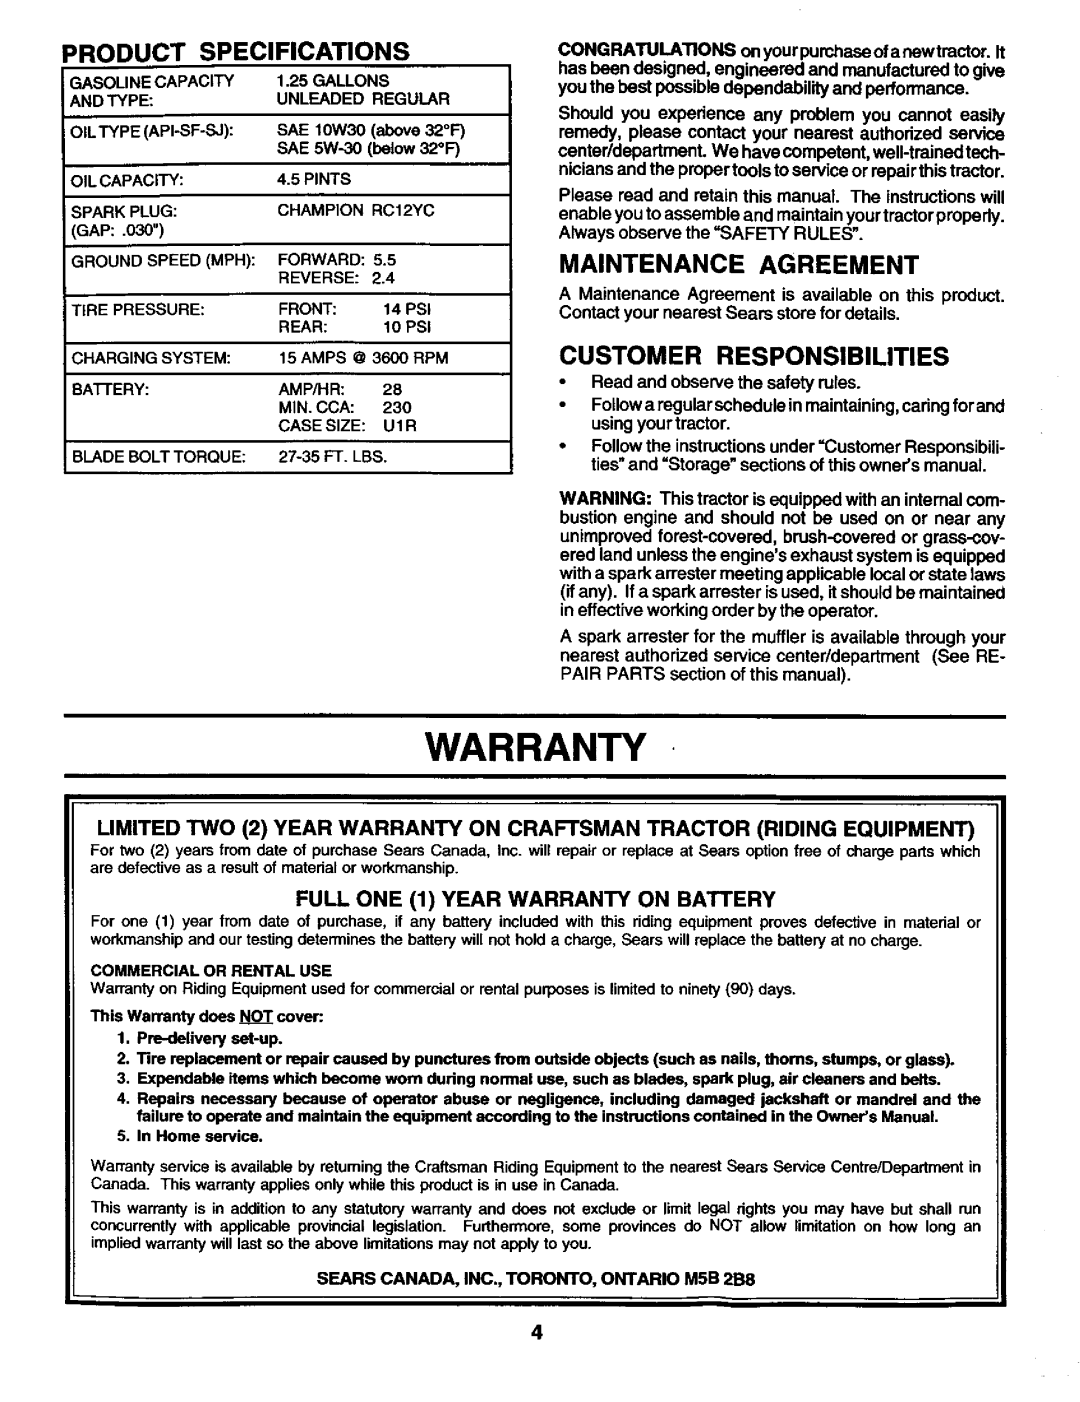 Craftsman 944.602951 owner manual Warranty, Product Specifications, Maintenance Agreement, Customer Responsibilities 